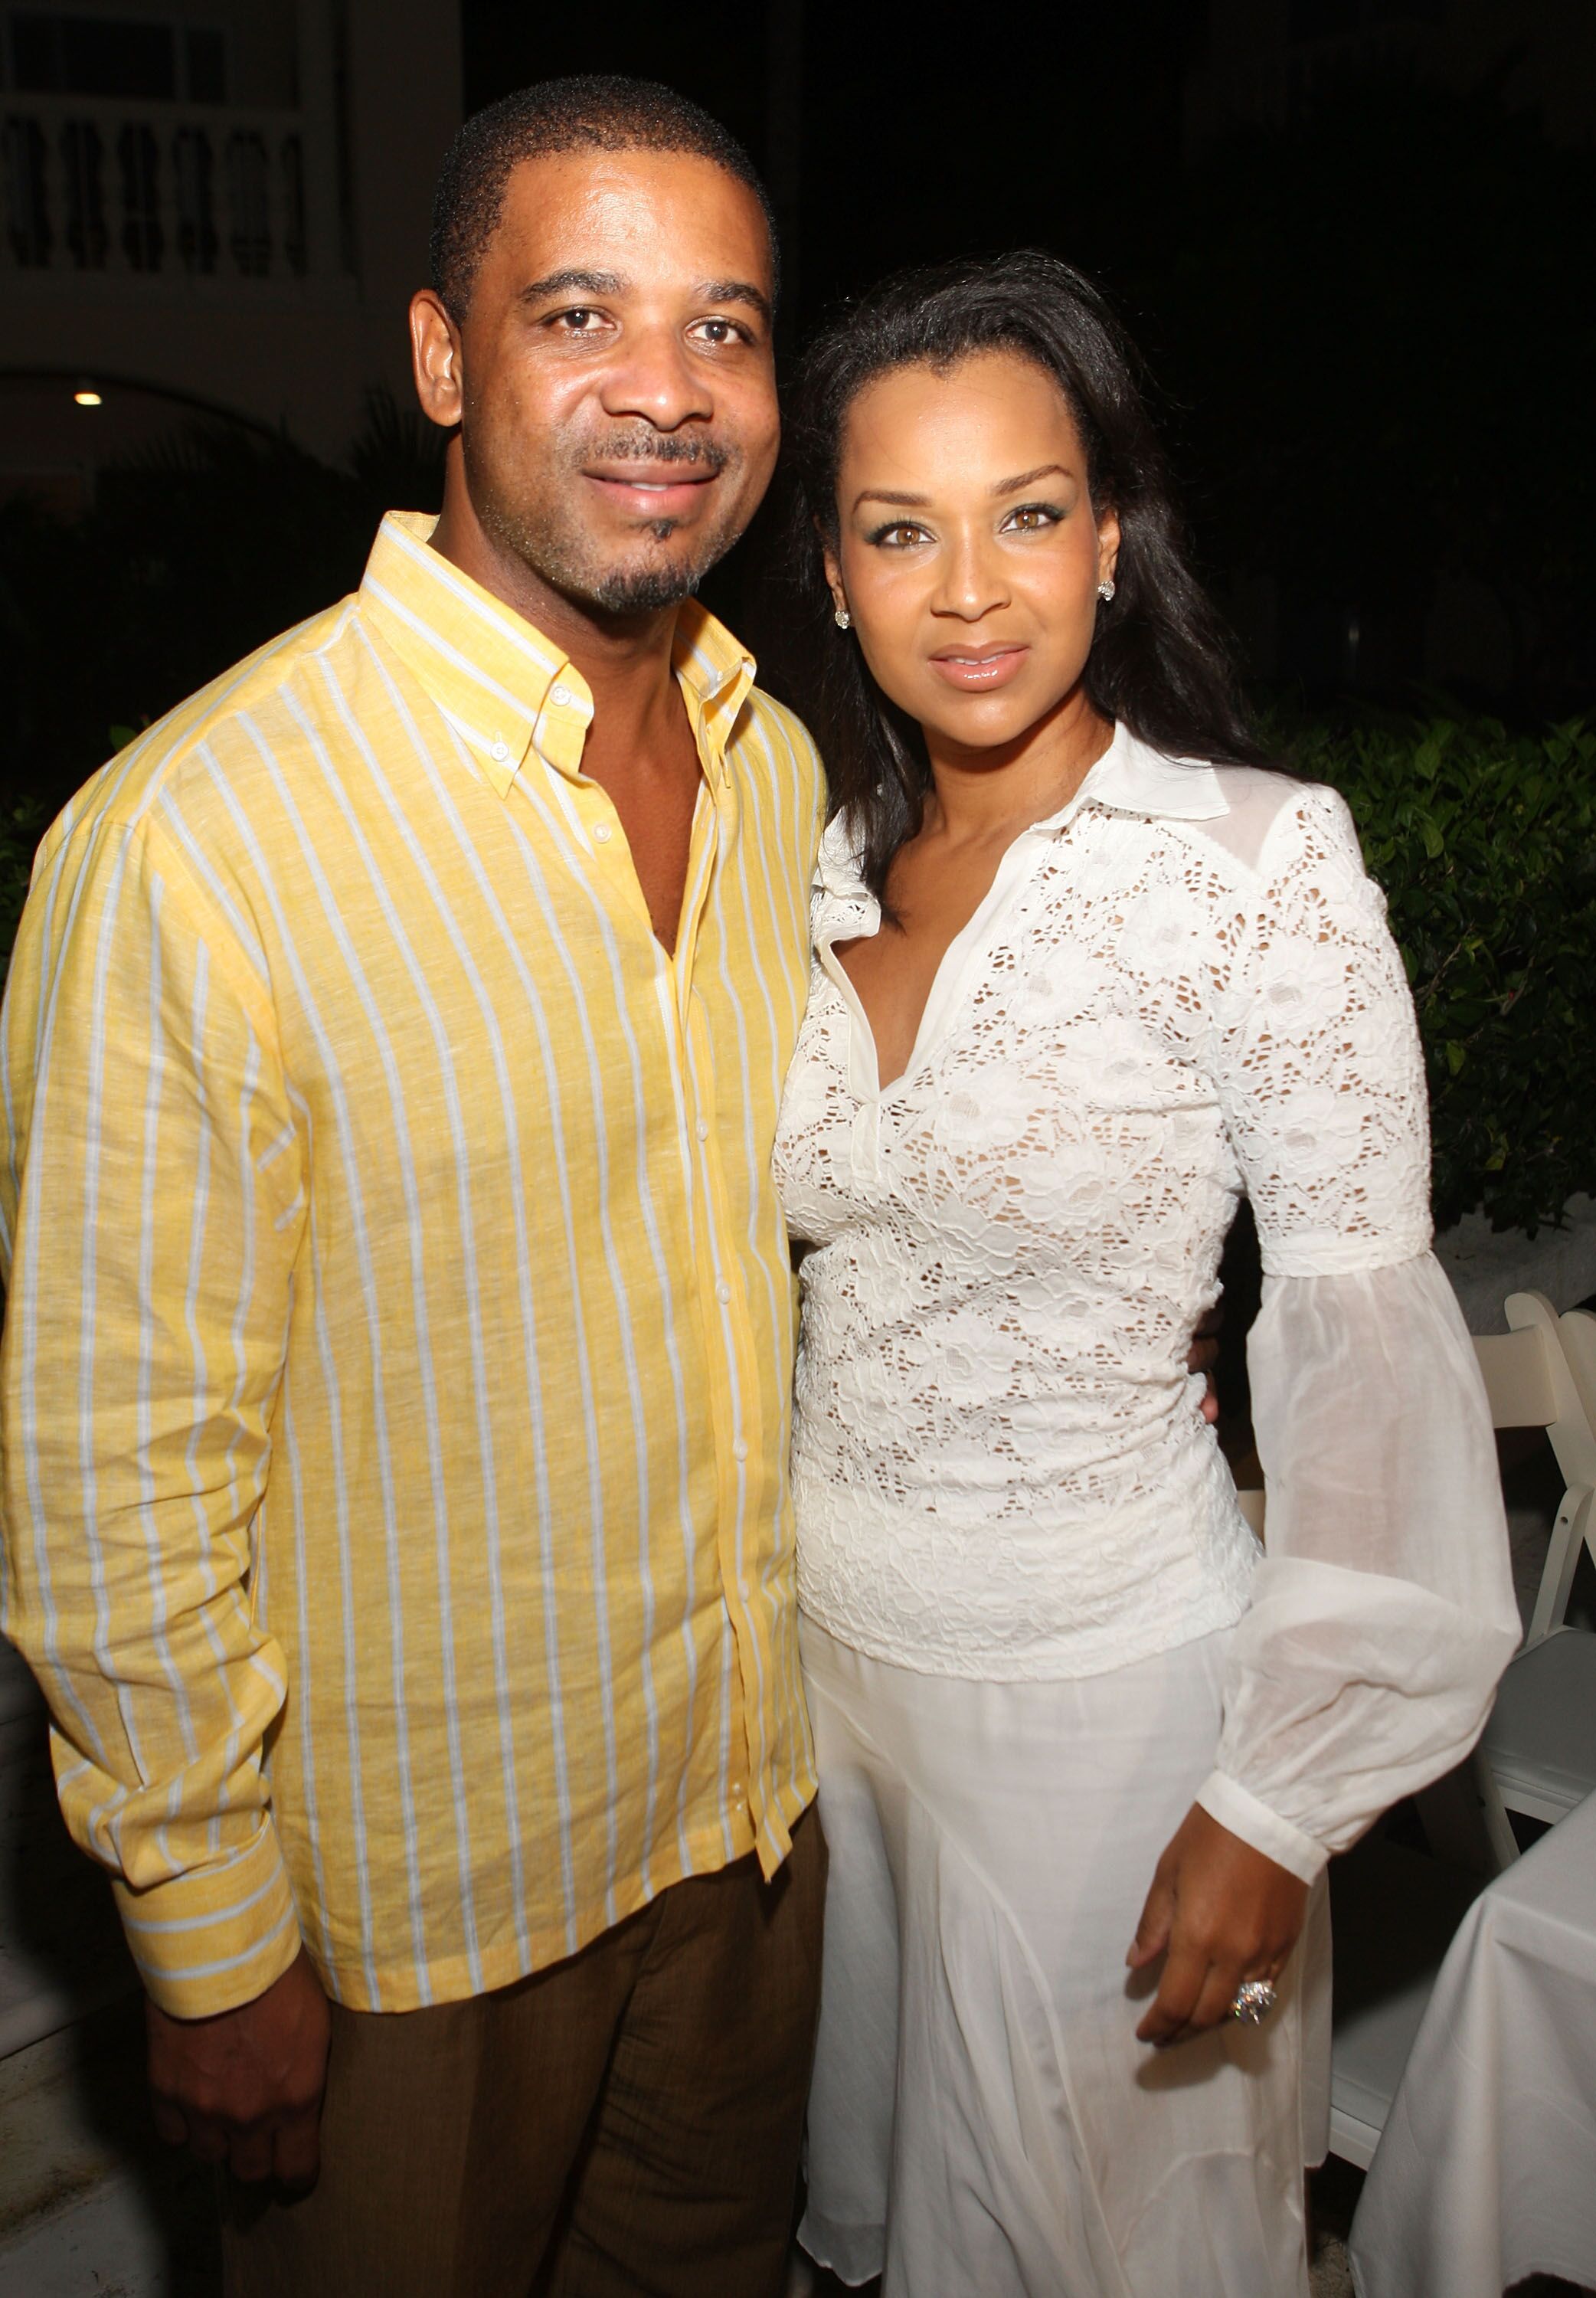 Dr. Michael E. Misick and LisaRaye Misick attend the Turks and Caicos International Film Festival at Grace Bay on October 16, 2007 | Photo: Getty Images